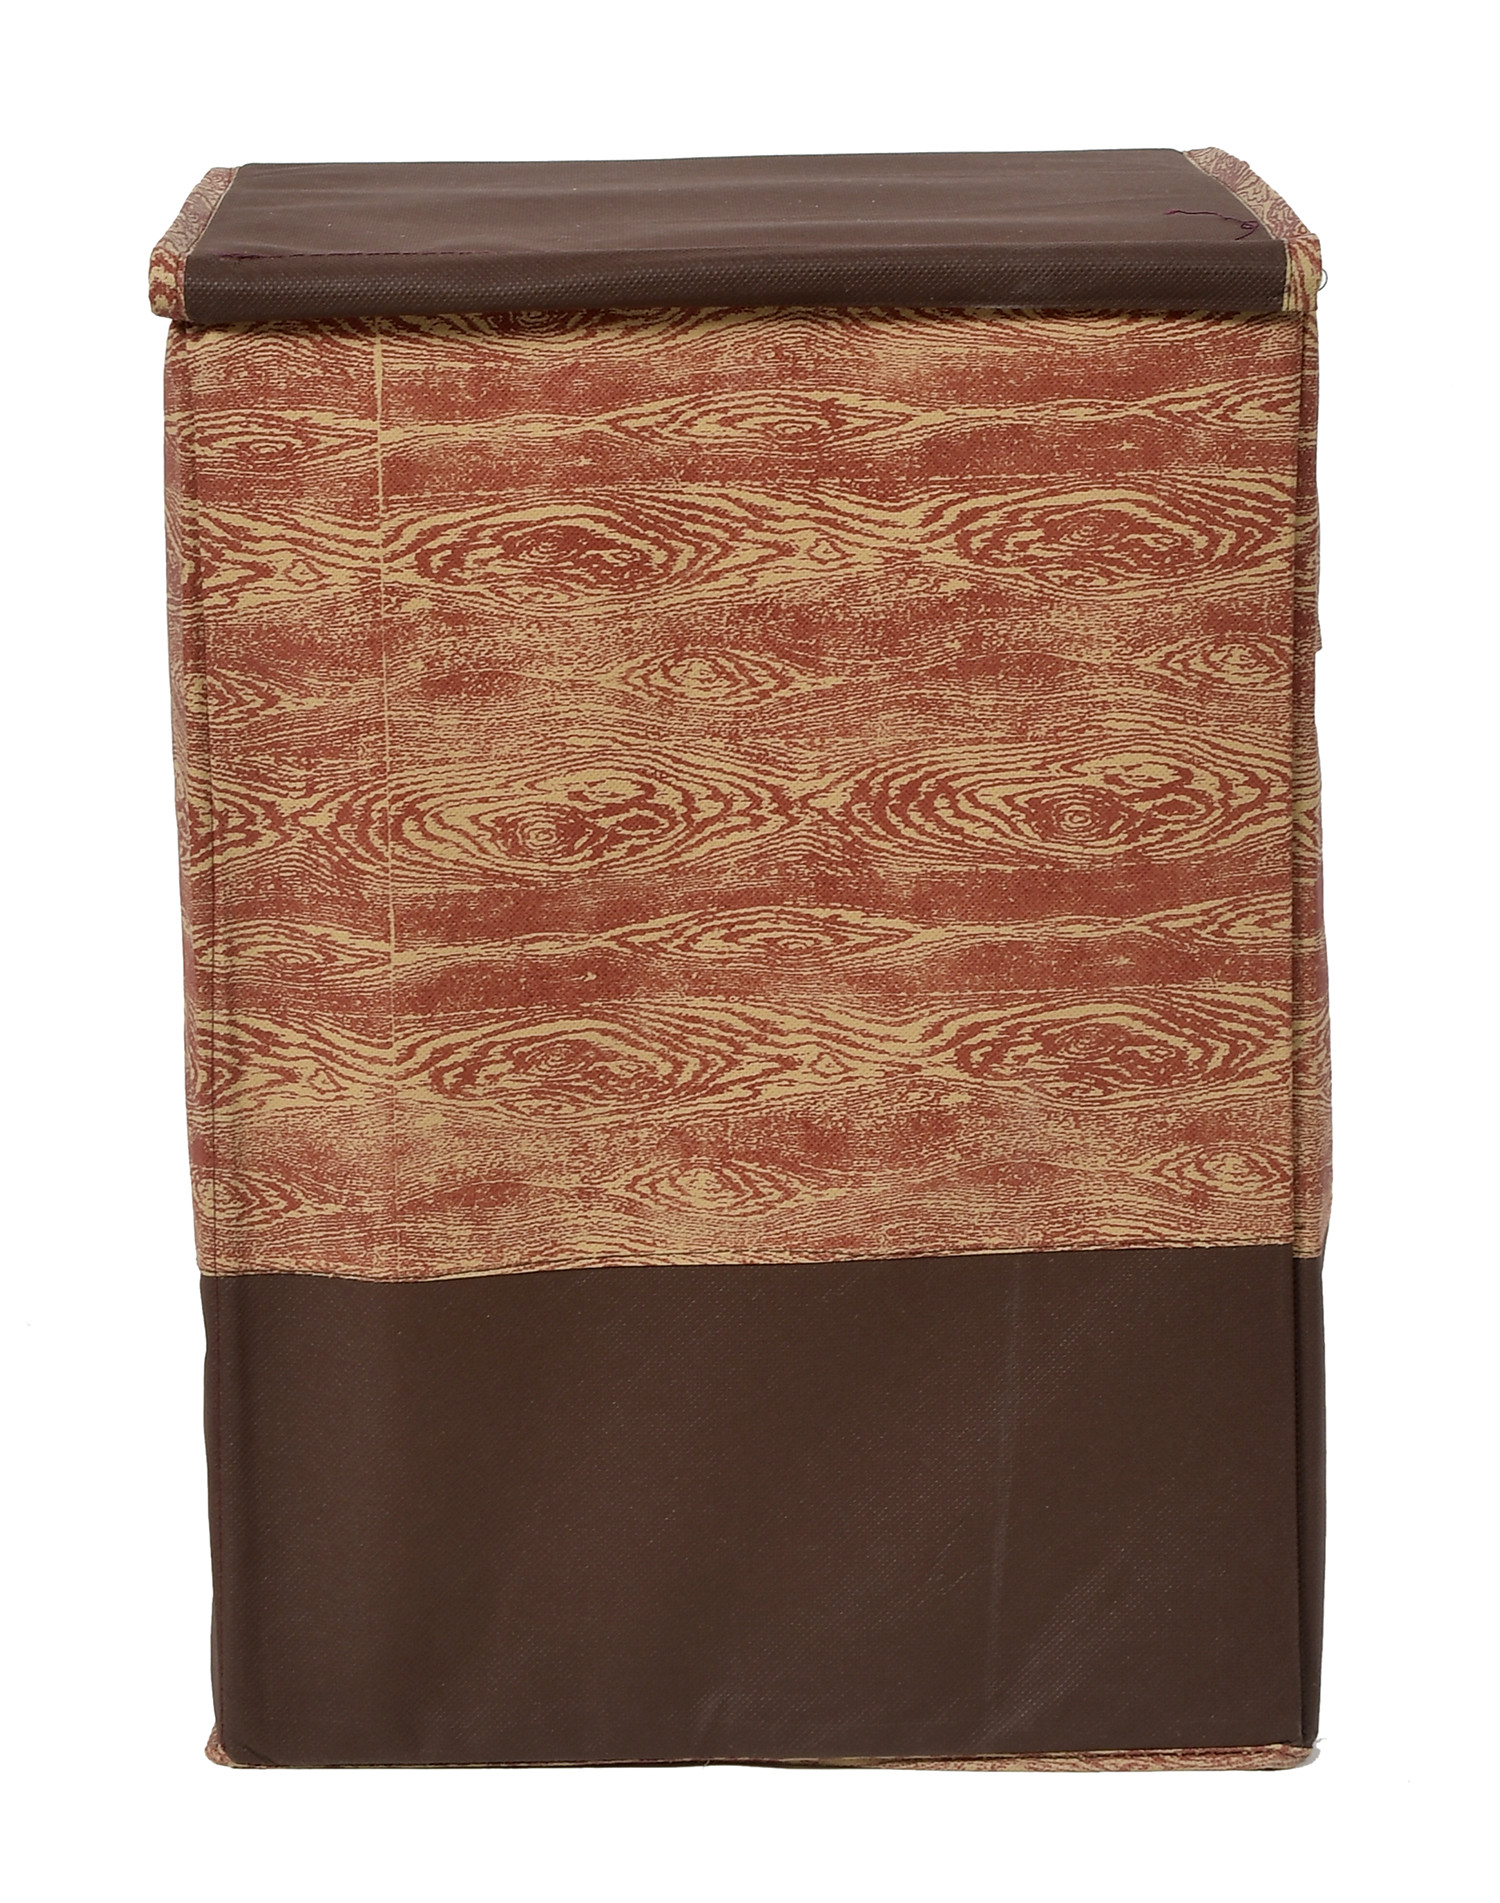 Kuber Industries Wooden Design Non-Woven Foldable Large Laundry basket/Hamper With Lid & Handles (Brown)-44KM0197